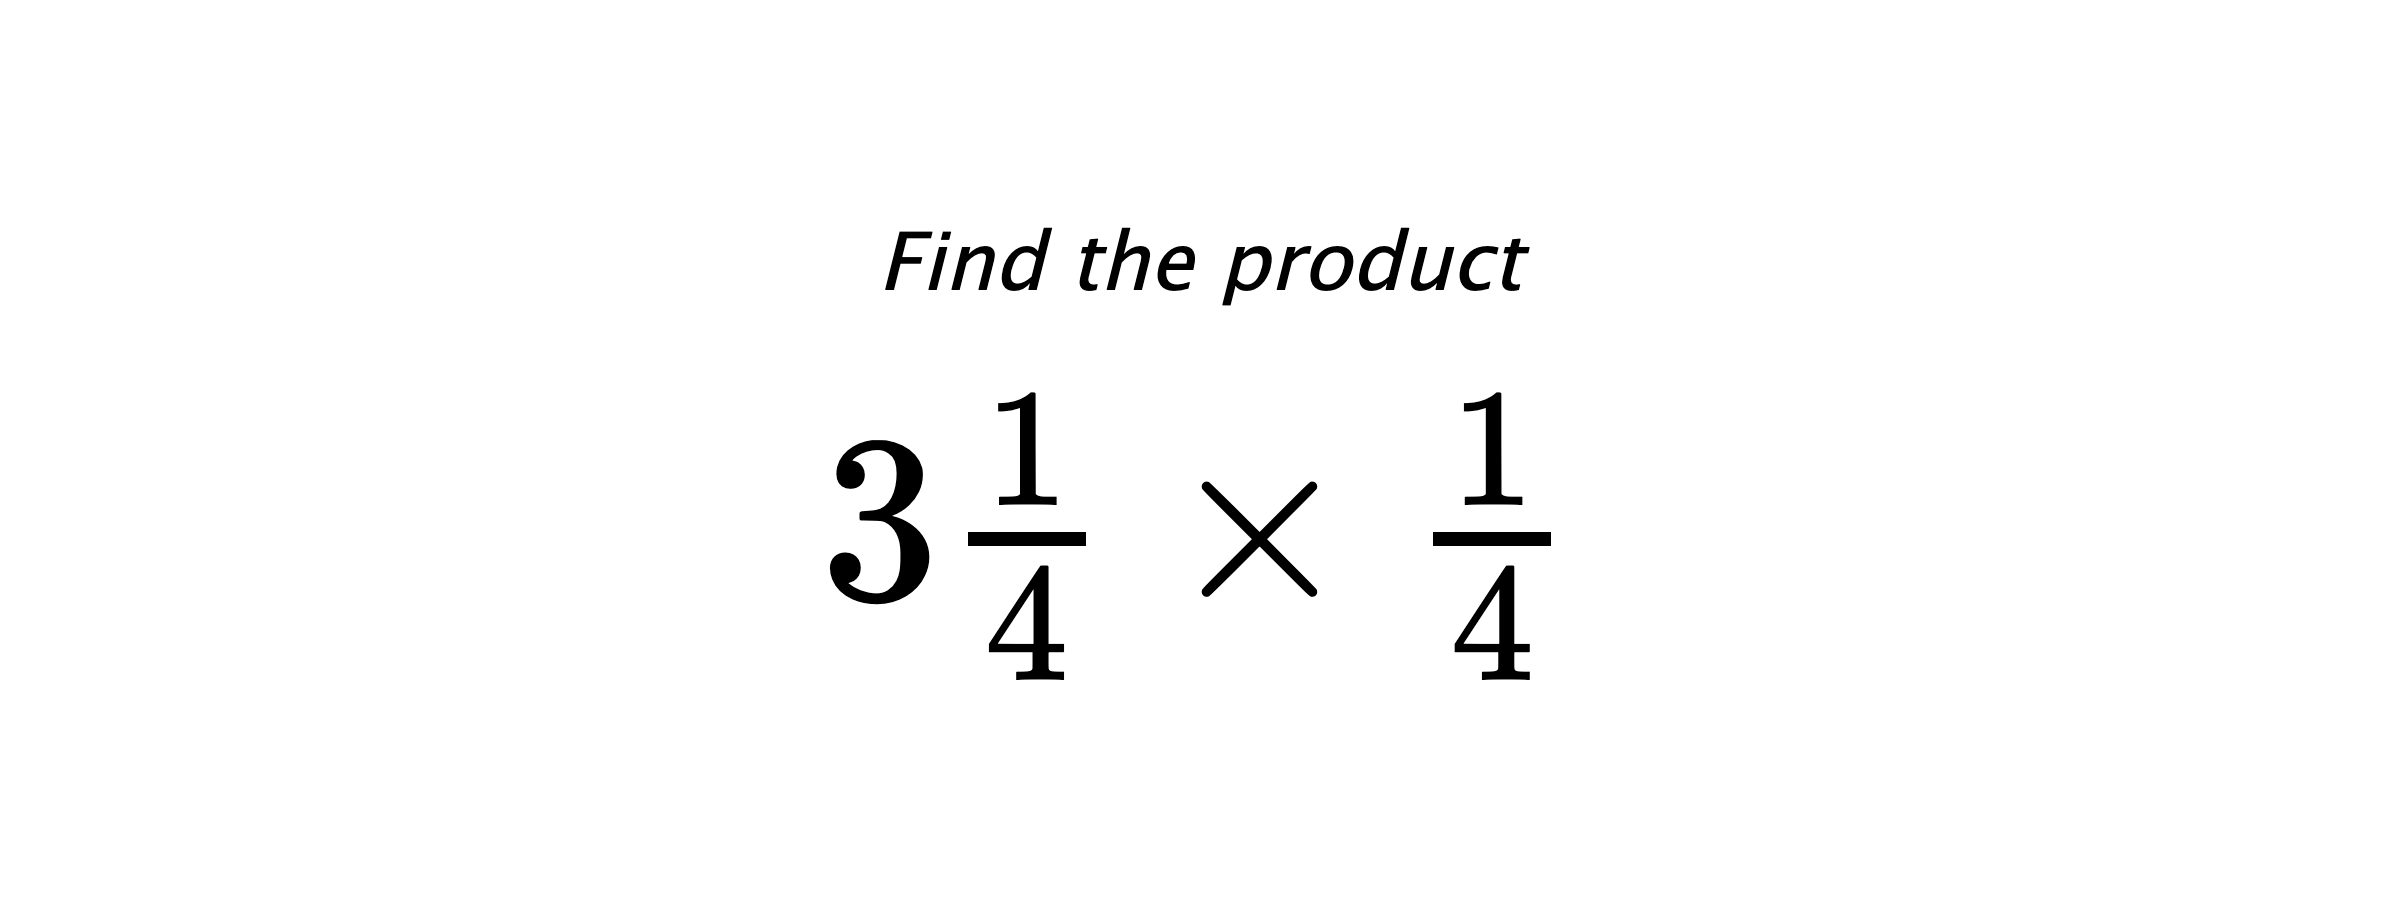 Find the product $ 3\frac{1}{4} \times \frac{1}{4} $